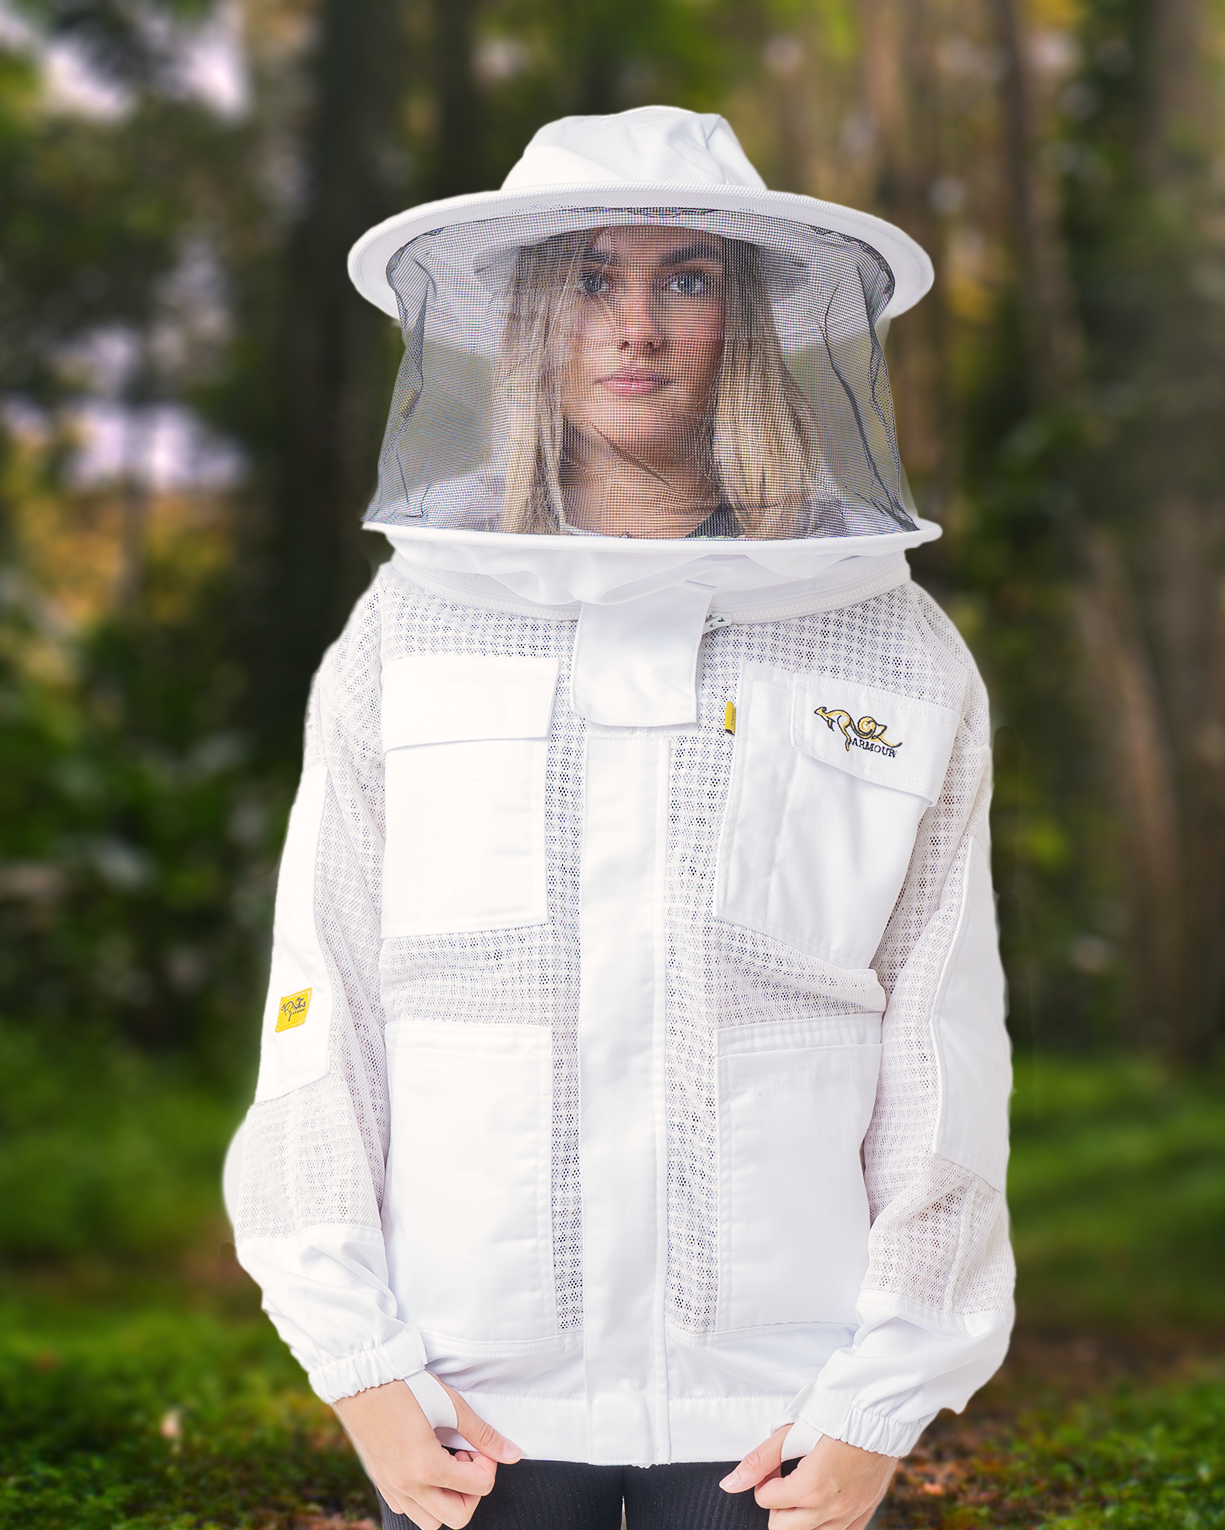 A woman also wearing a beekeeping Jacket